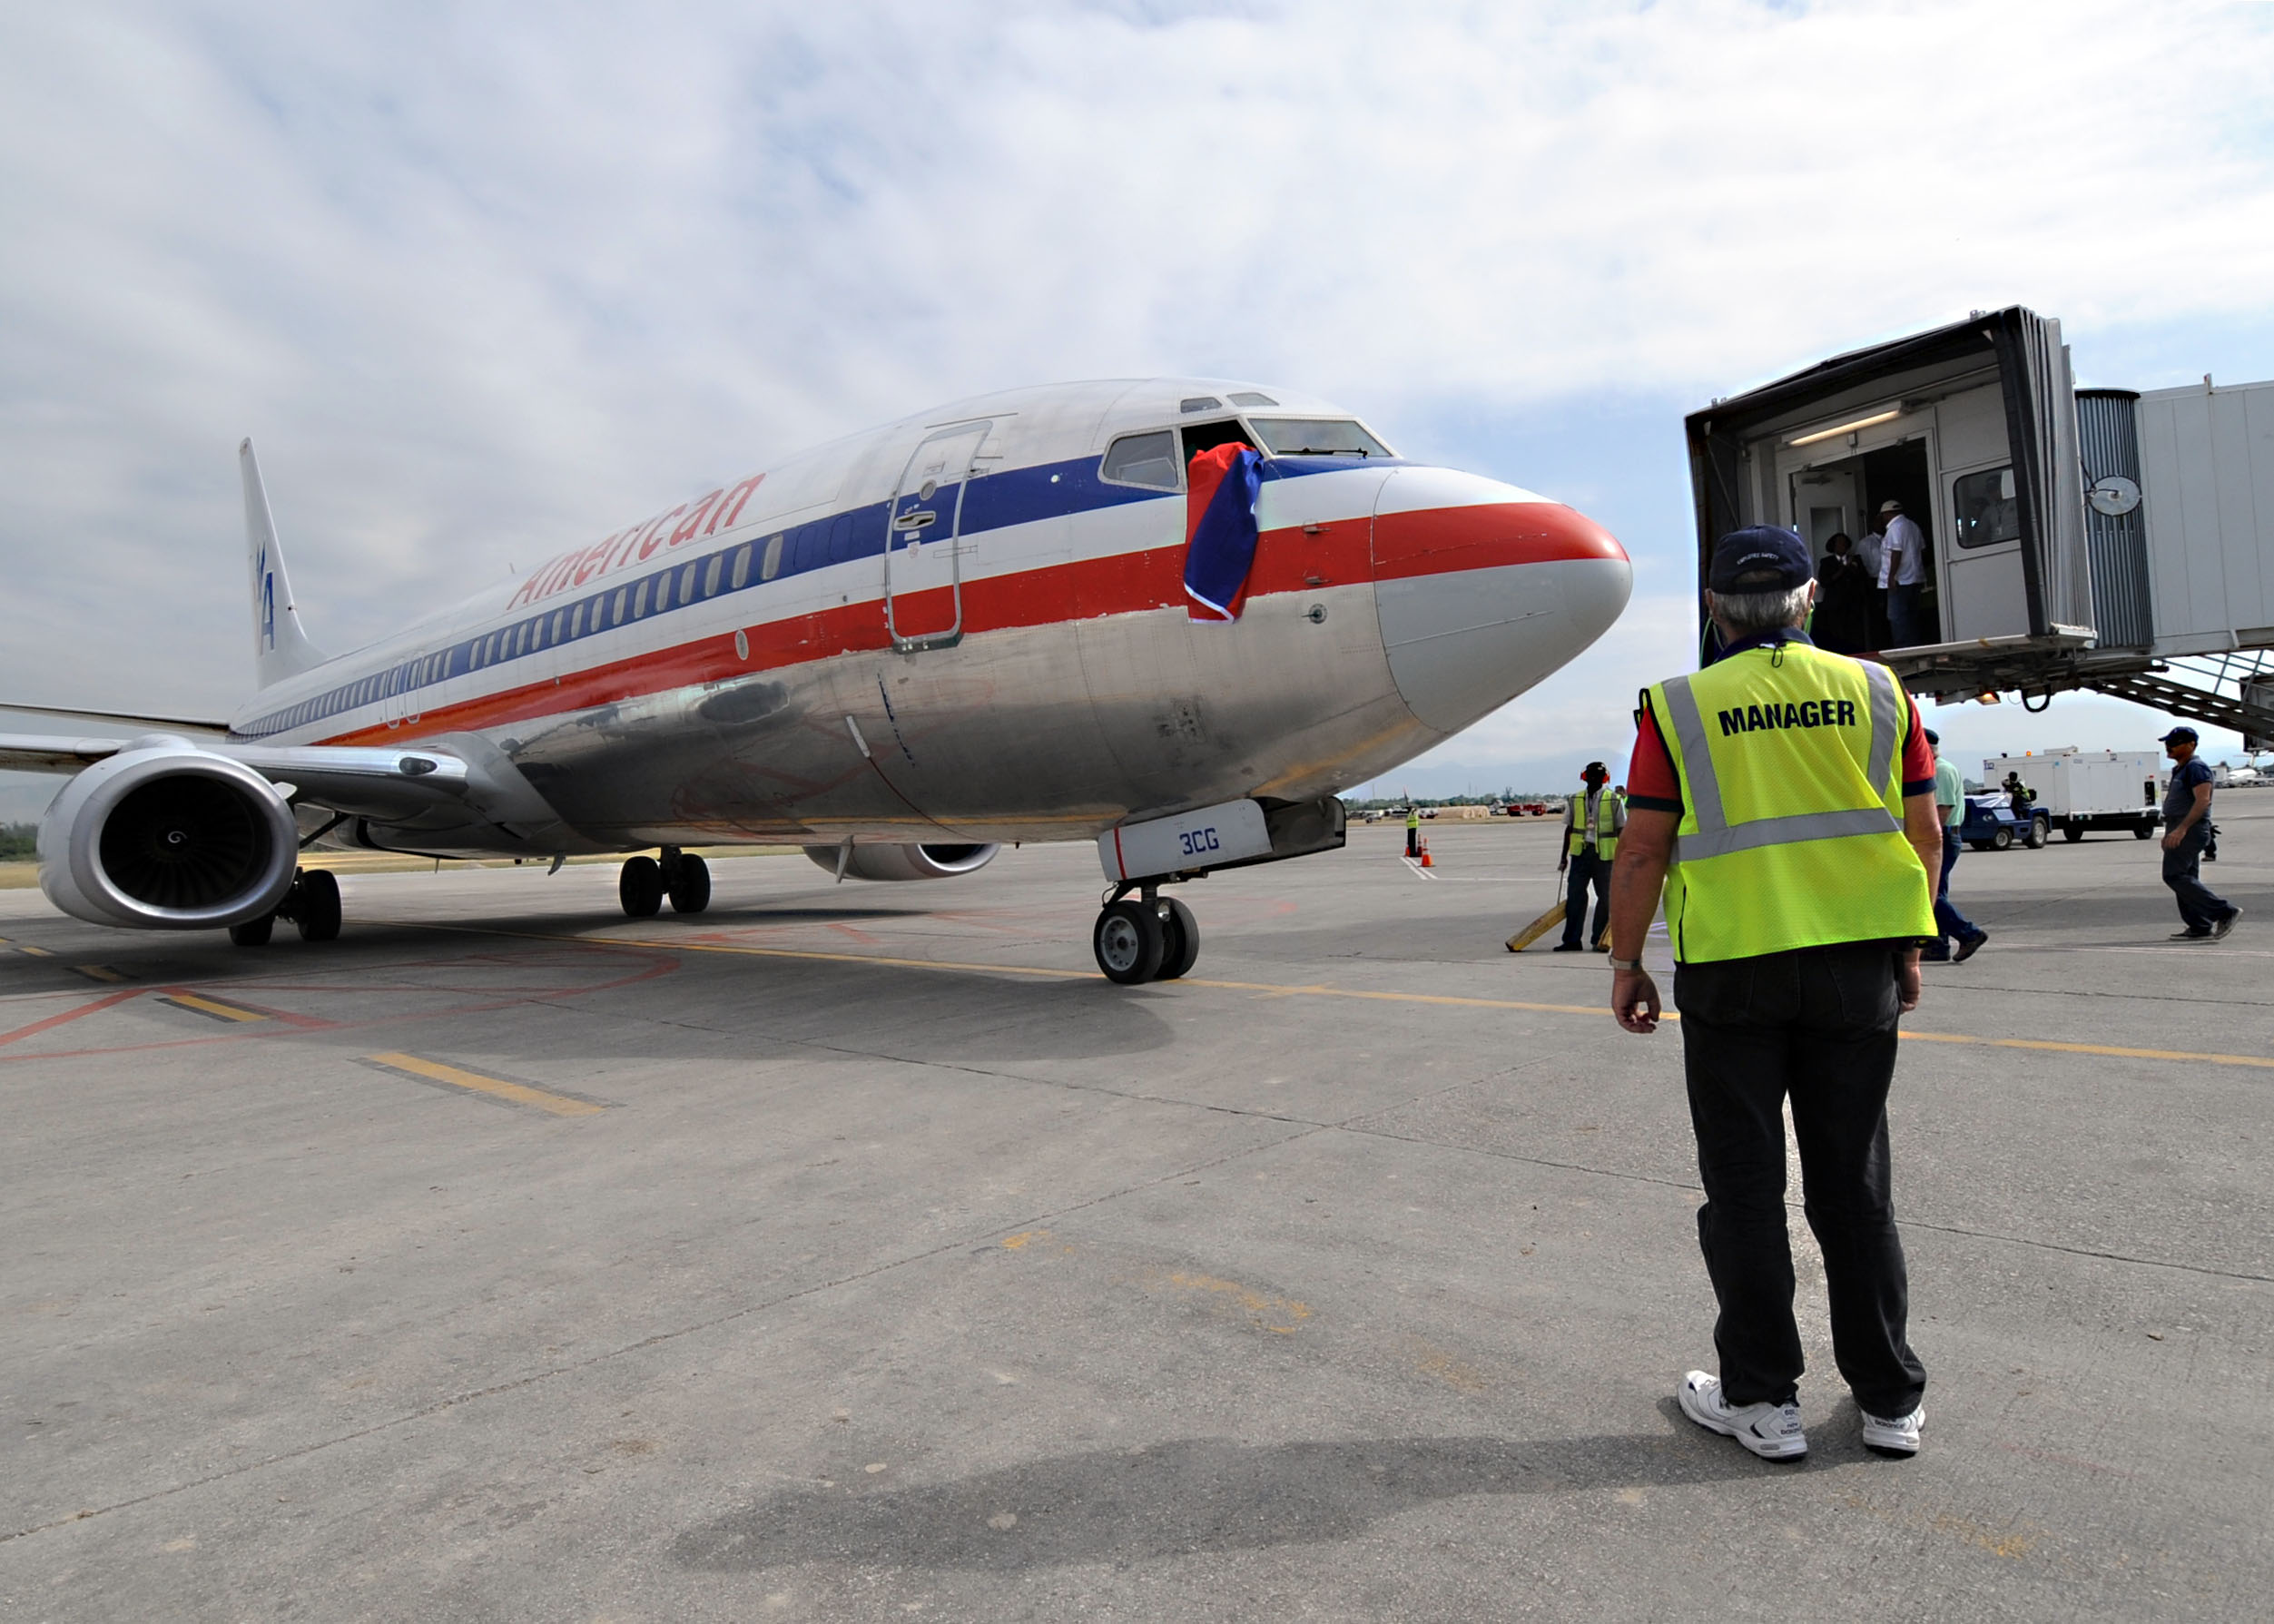 US Navy 100219-N-5961C-003 n American Airlines aircraft arrives at Toussaint Louverture International Airport in Port-au-Prince, Haiti